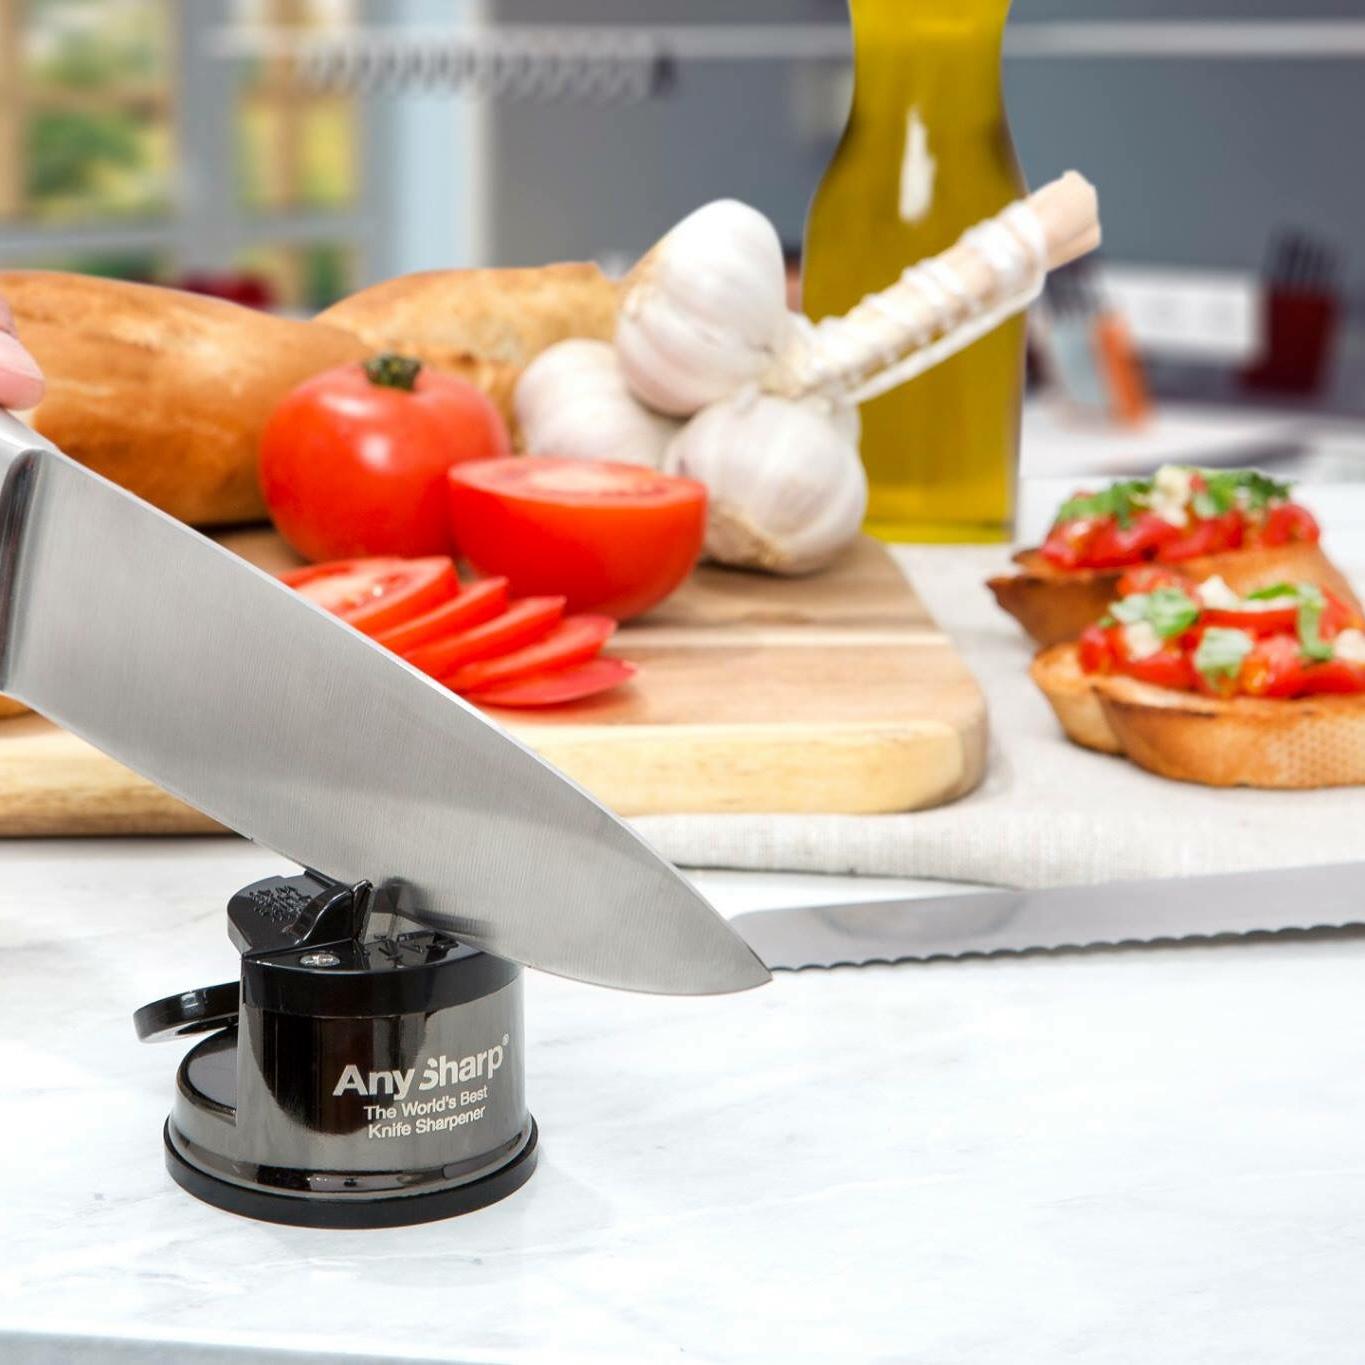 AnySharp Knife Sharpener Review: You'll Love the Available Colors! – Get  Cooking!